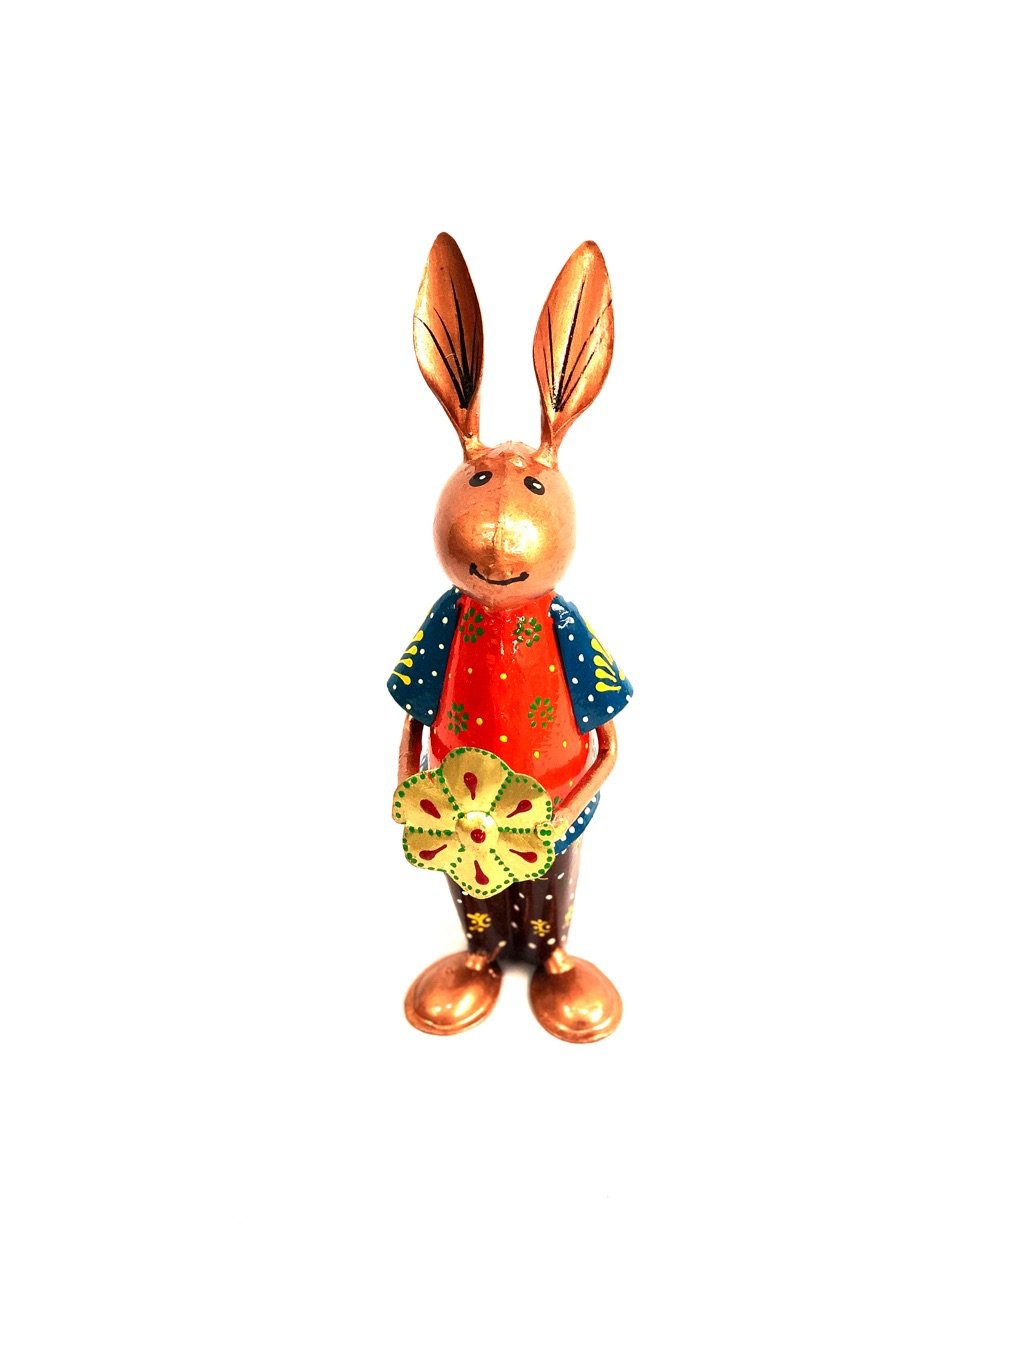 Metal Showpiece Rabbit Kid's Room Decorative Objects Artefacts By Tamrapatra